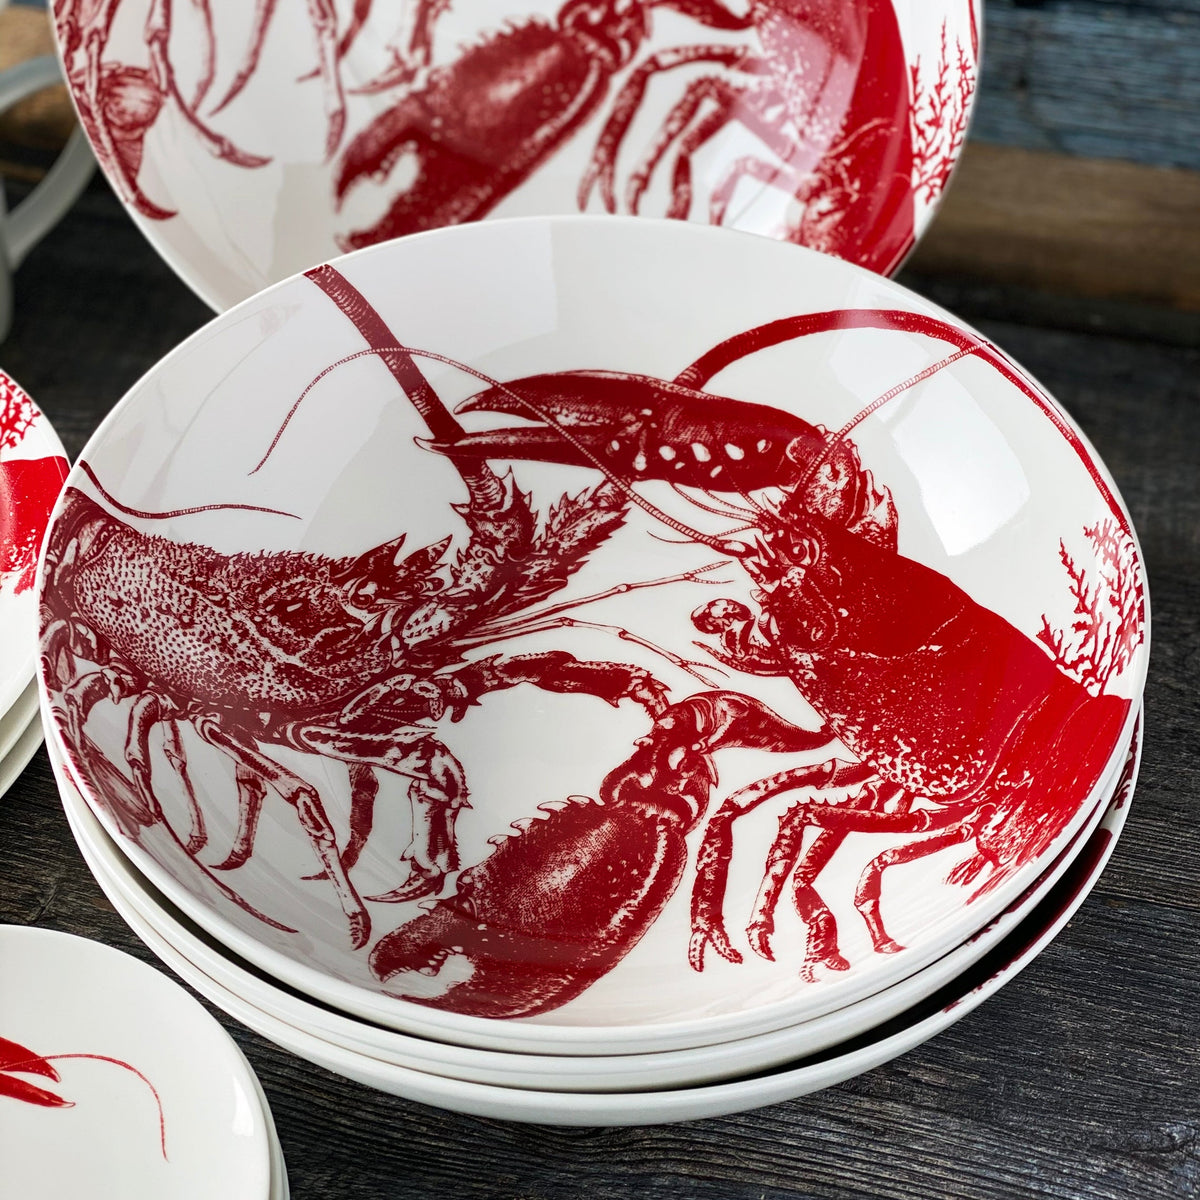 A set of Lobster Wide Serving Bowl Red plates from Caskata Artisanal Home, perfect for a seaside-style dining experience.